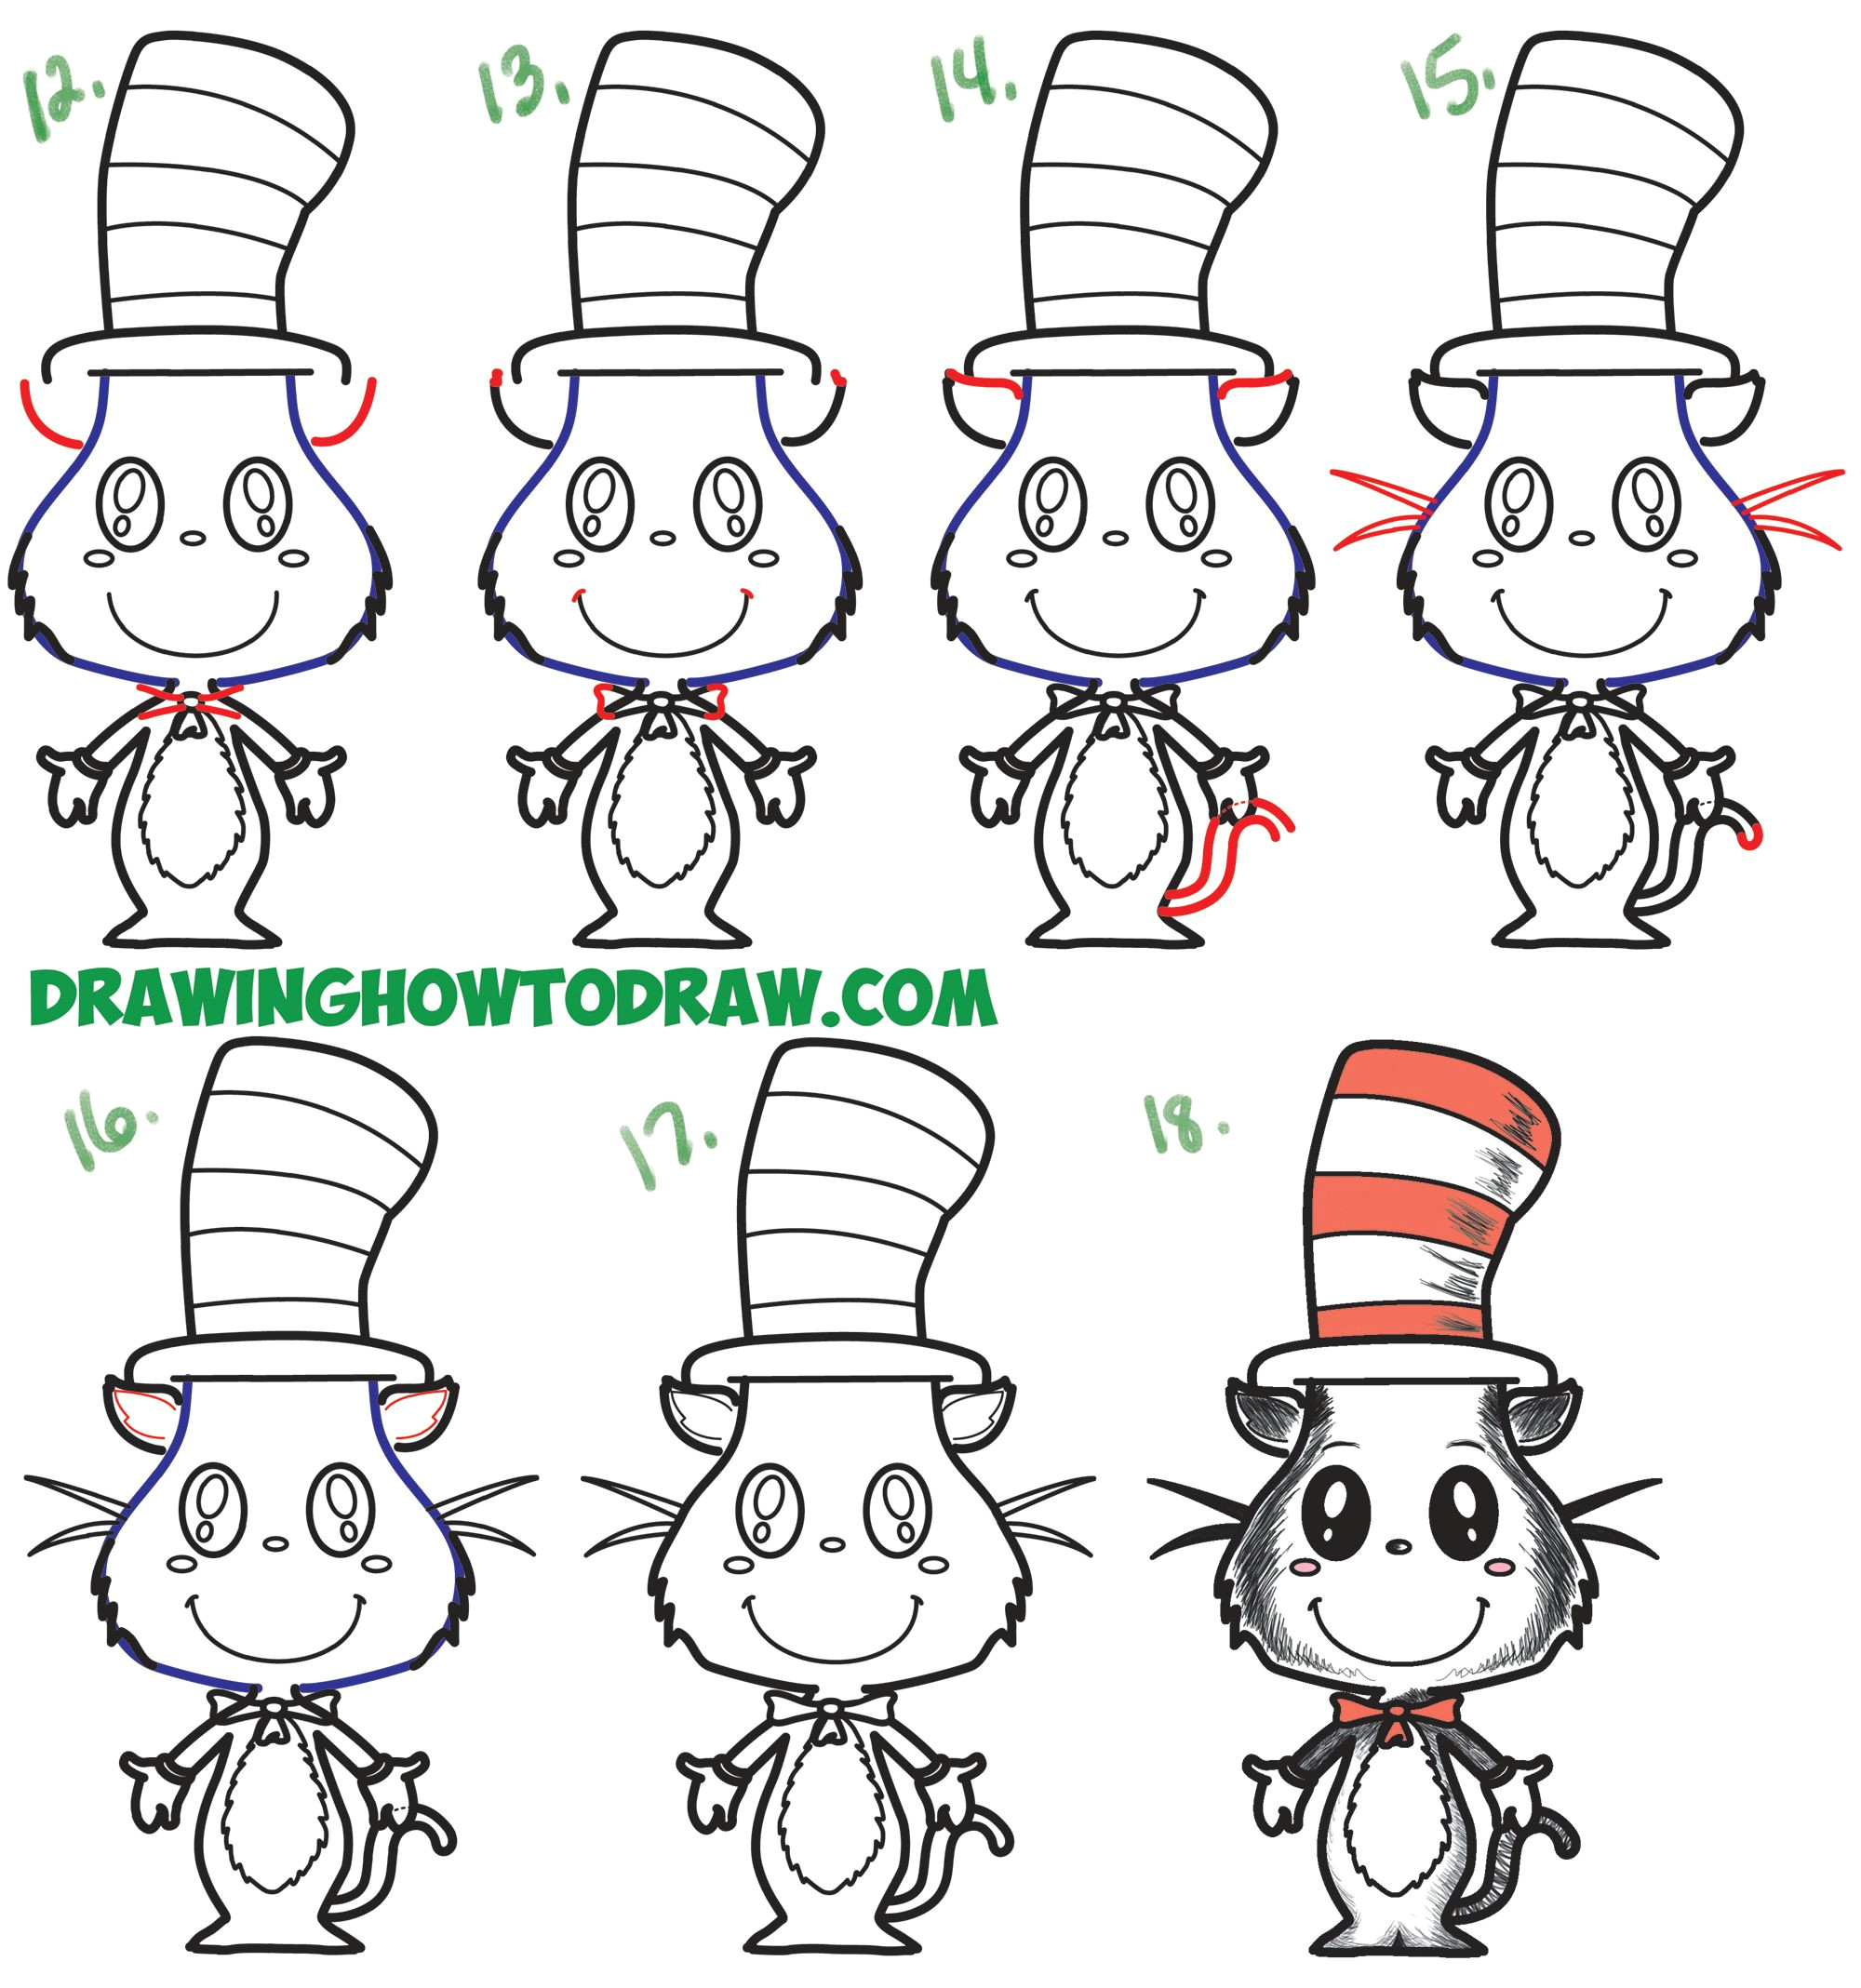 Drawing A Cartoon Cat Step by Step How to Draw the Cat In the Hat Cute Kawaii Chibi Version Easy